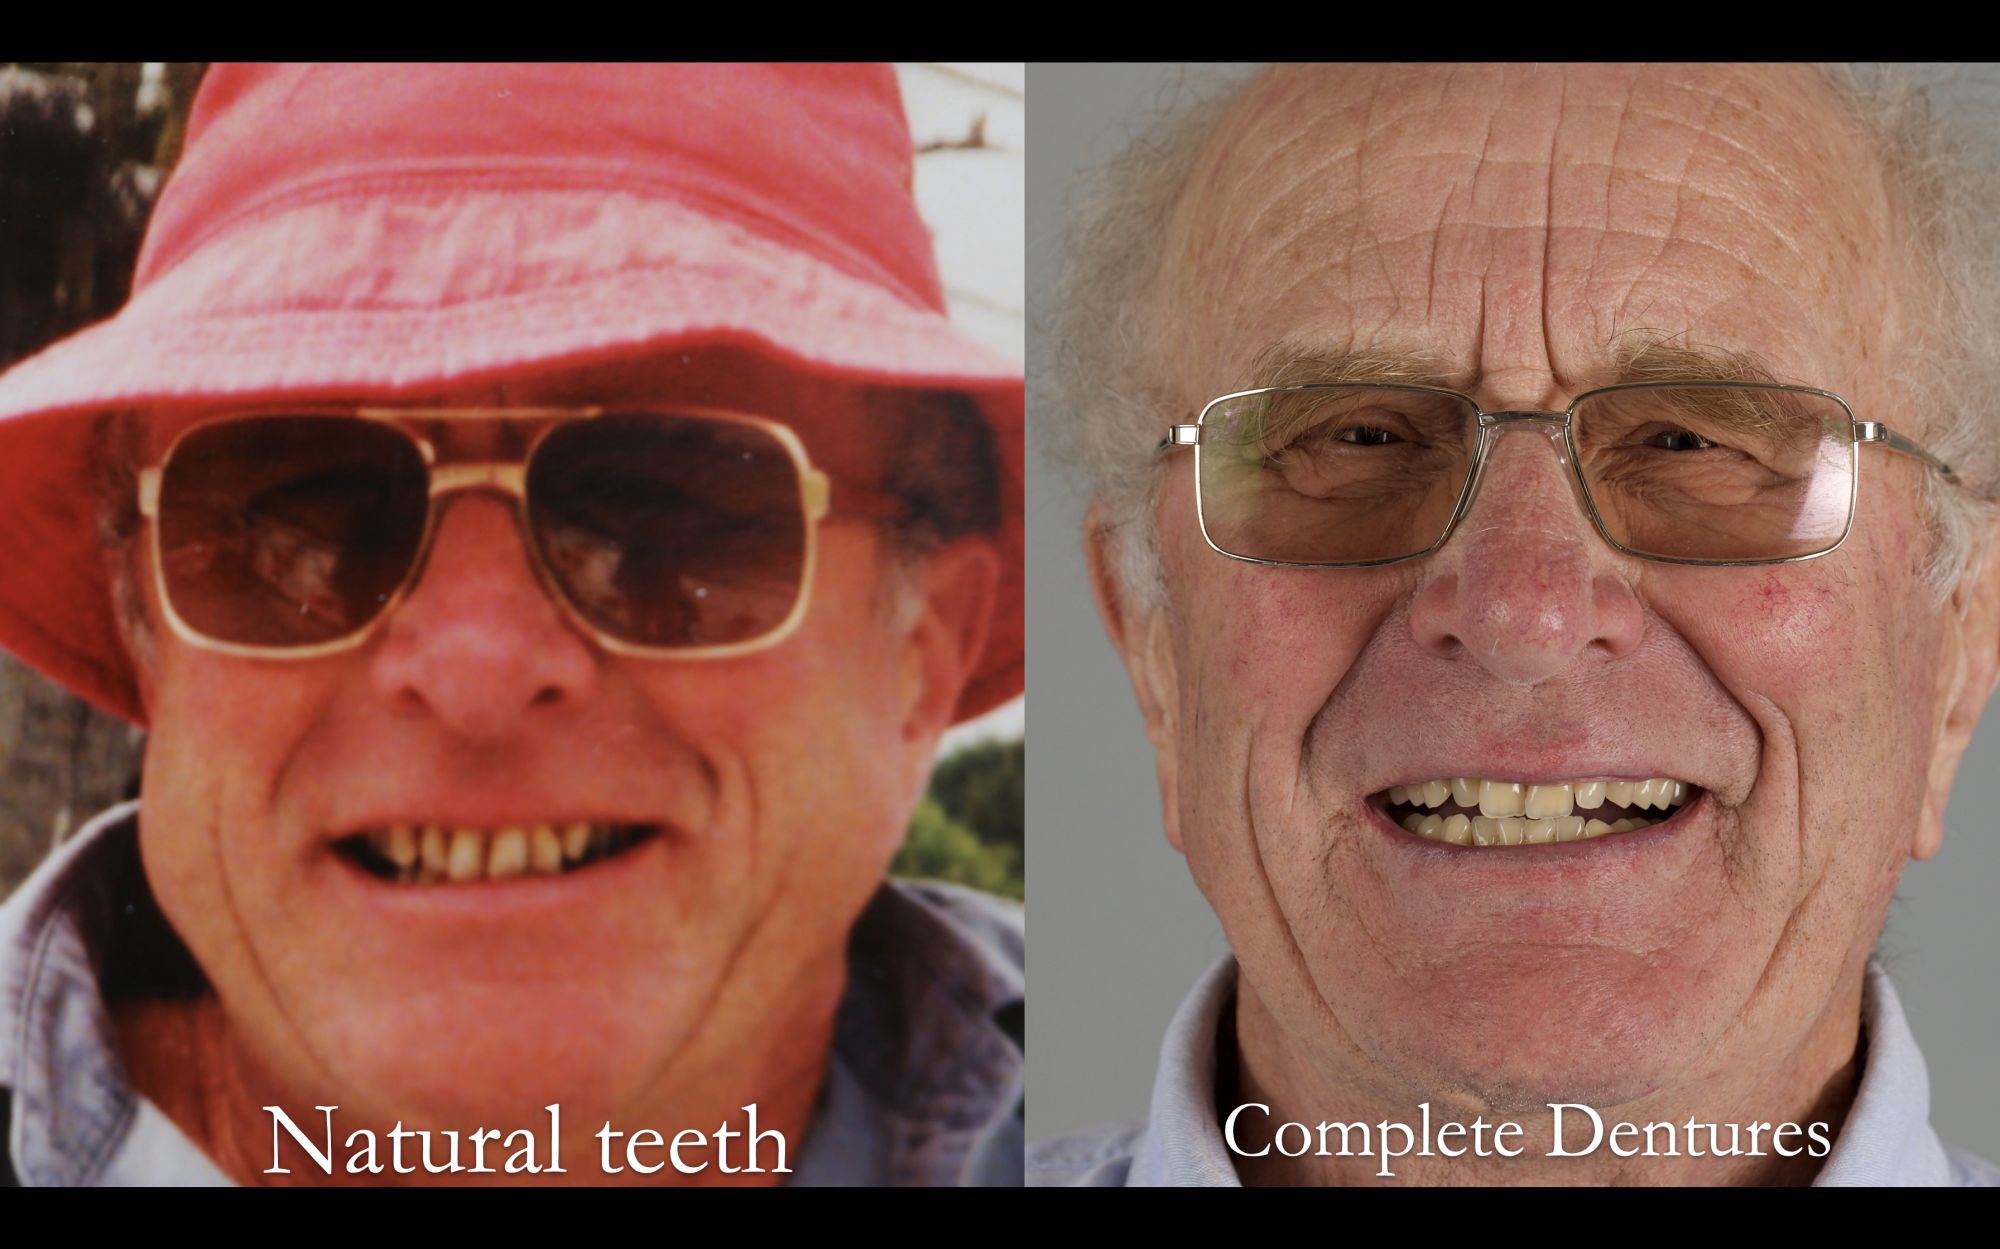 No one knows they are dentures....